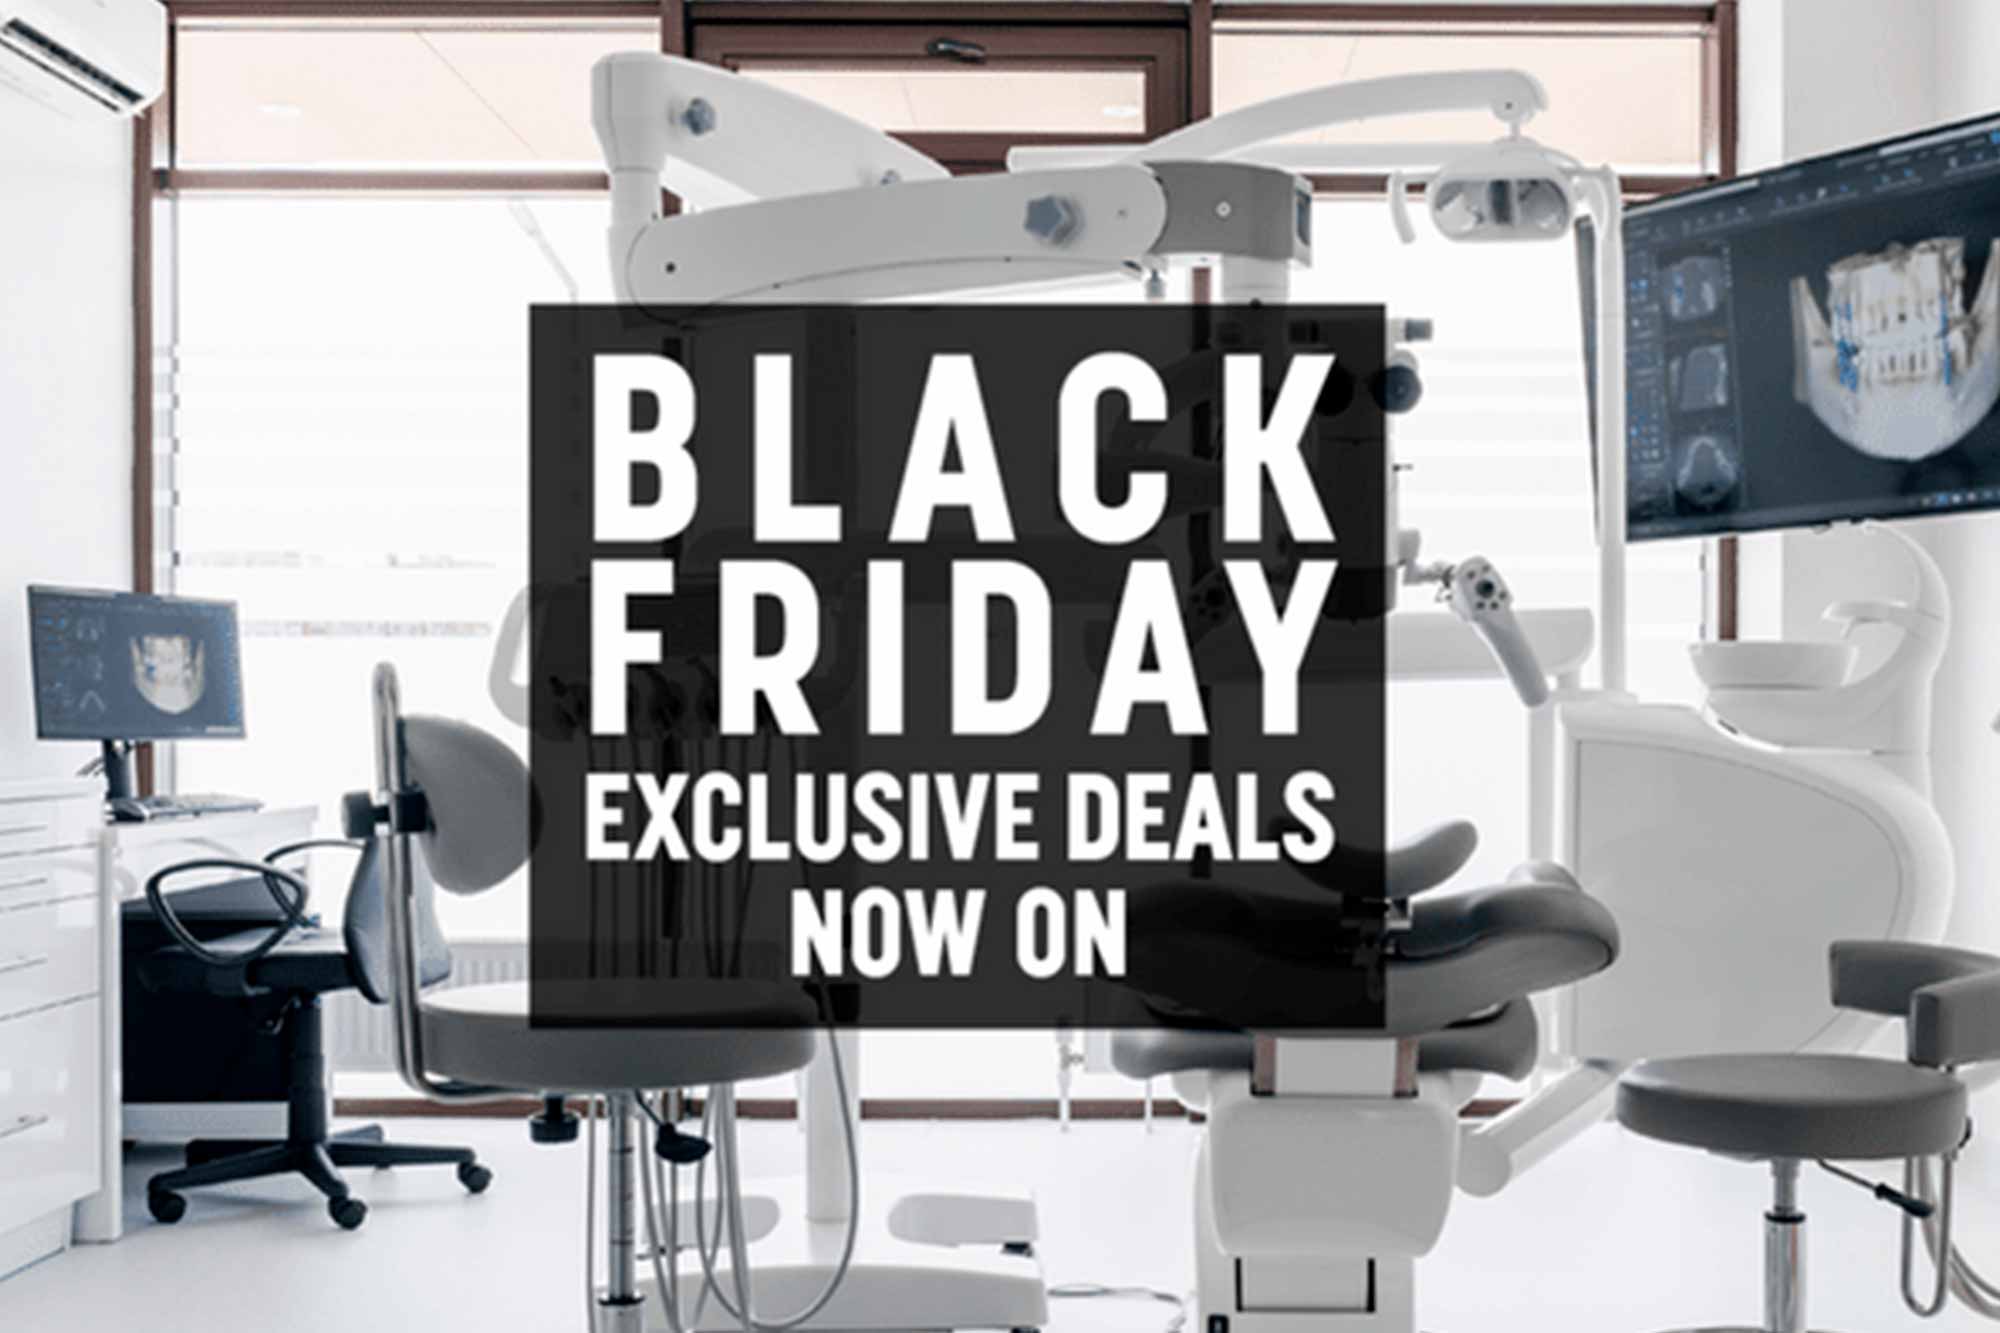 Kent Express Black Friday event is now on